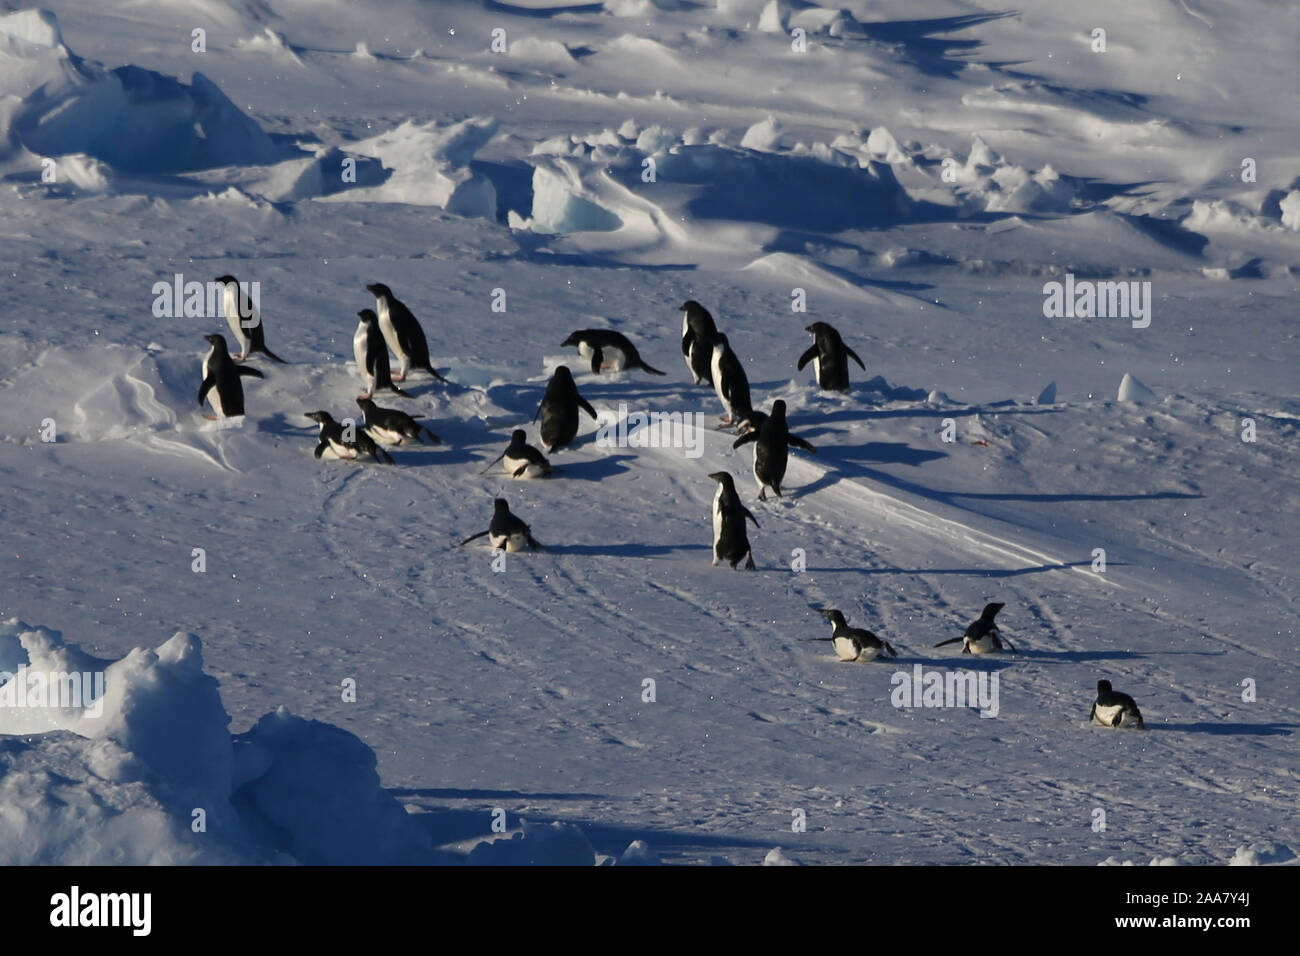 Aboard Xuelong 2. 20th Nov, 2019. A group of penguins are seen in this photo taken from aboard China's polar icebreaker Xuelong 2 in Antarctica water on Nov. 19, 2019. China's icebreakers Xuelong 2 and Xuelong are carring out the country's 36th Antarctic expedition. Credit: Liu Shiping/Xinhua/Alamy Live News Stock Photo